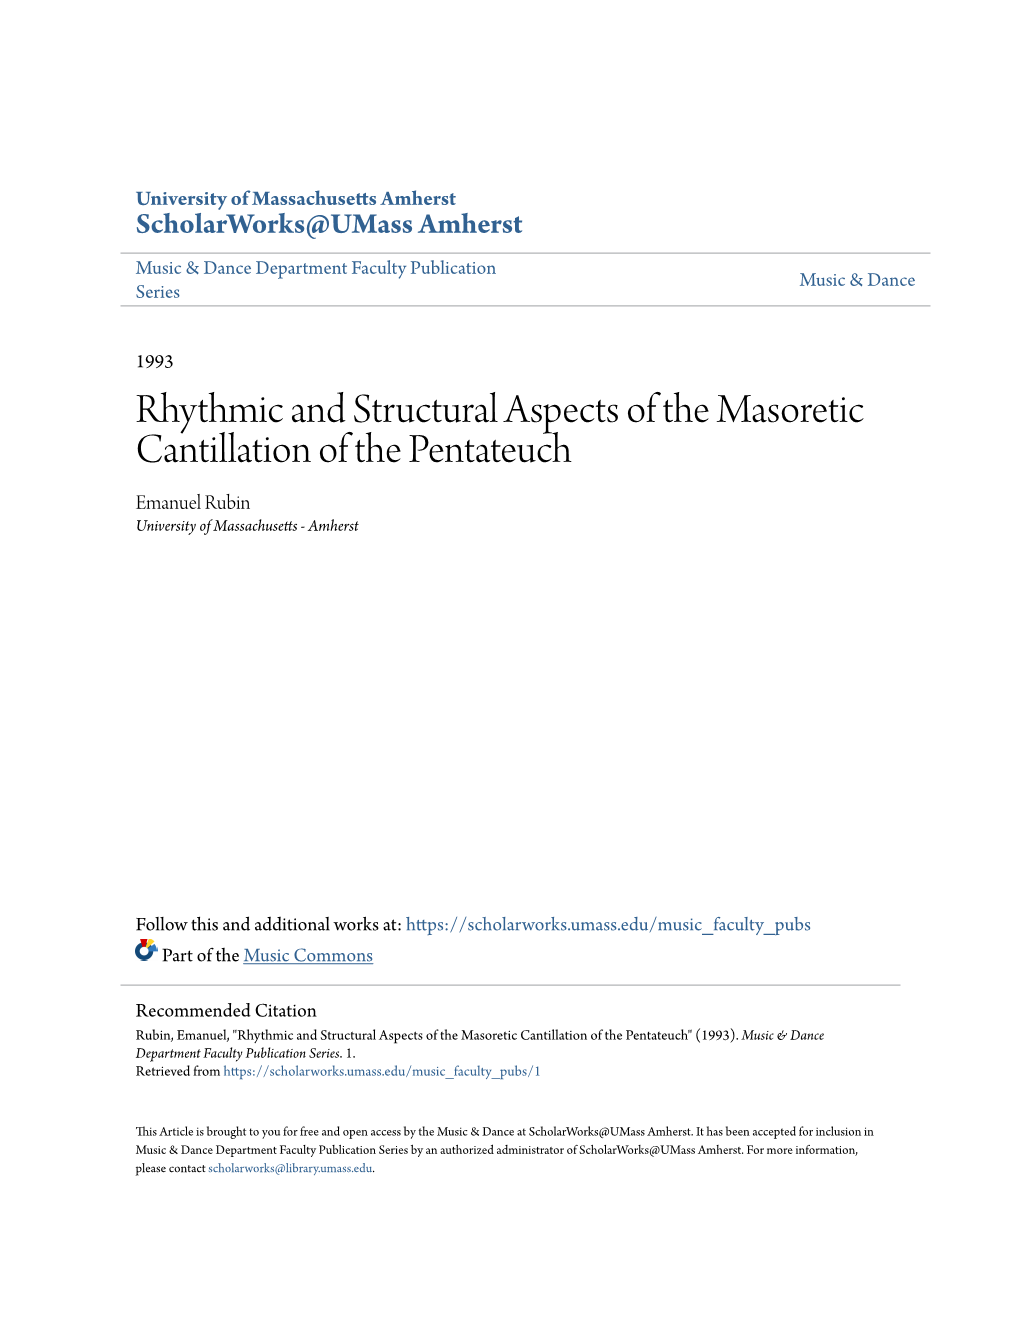 Rhythmic and Structural Aspects of the Masoretic Cantillation of the Pentateuch Emanuel Rubin University of Massachusetts - Amherst